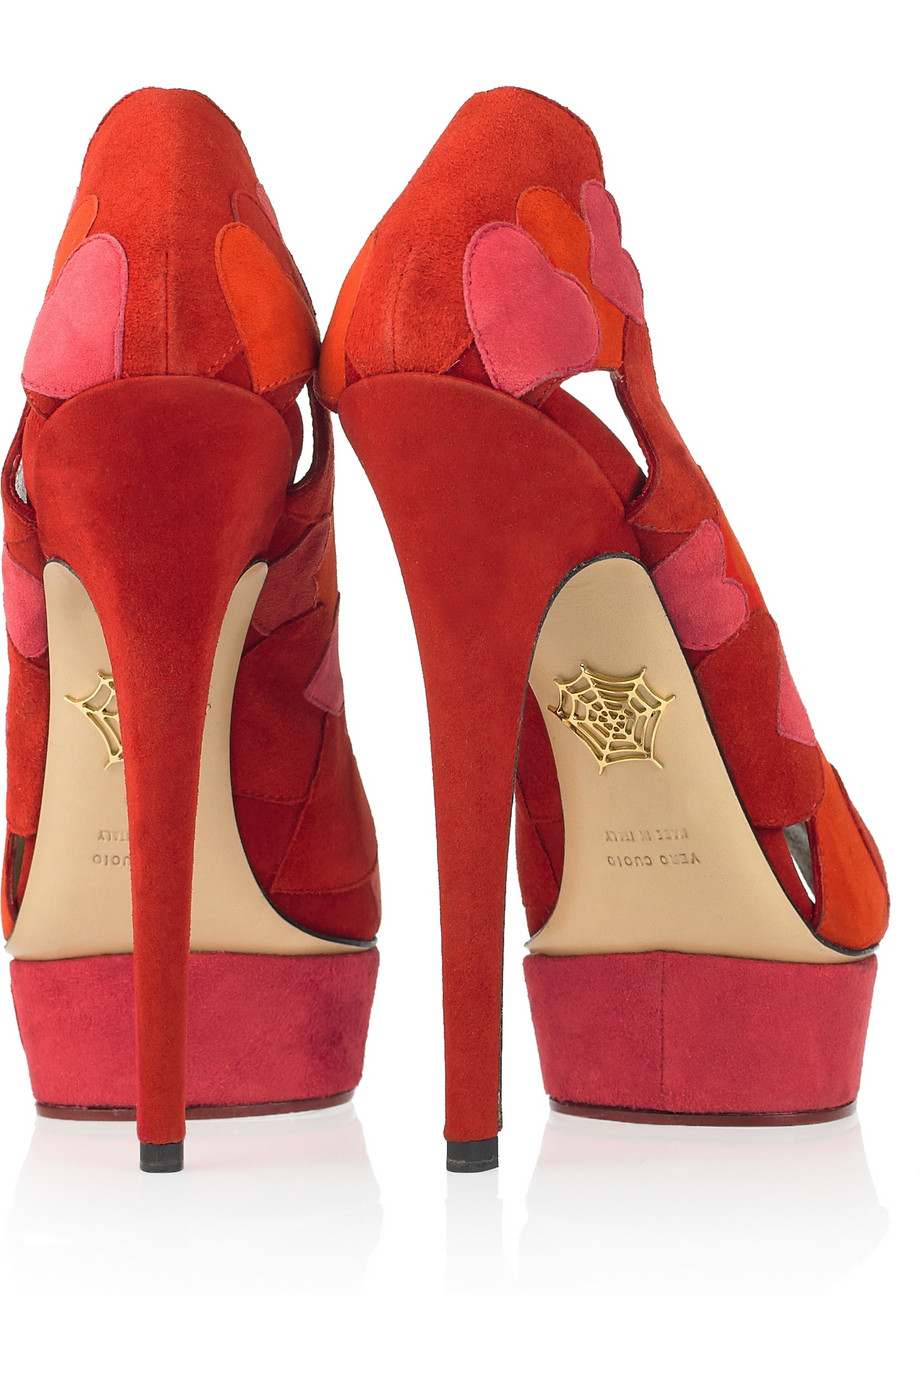 Women S High Heel Shoes Add A Bold Flash Of Color To Your Wedding Look In Charlotte Olympia